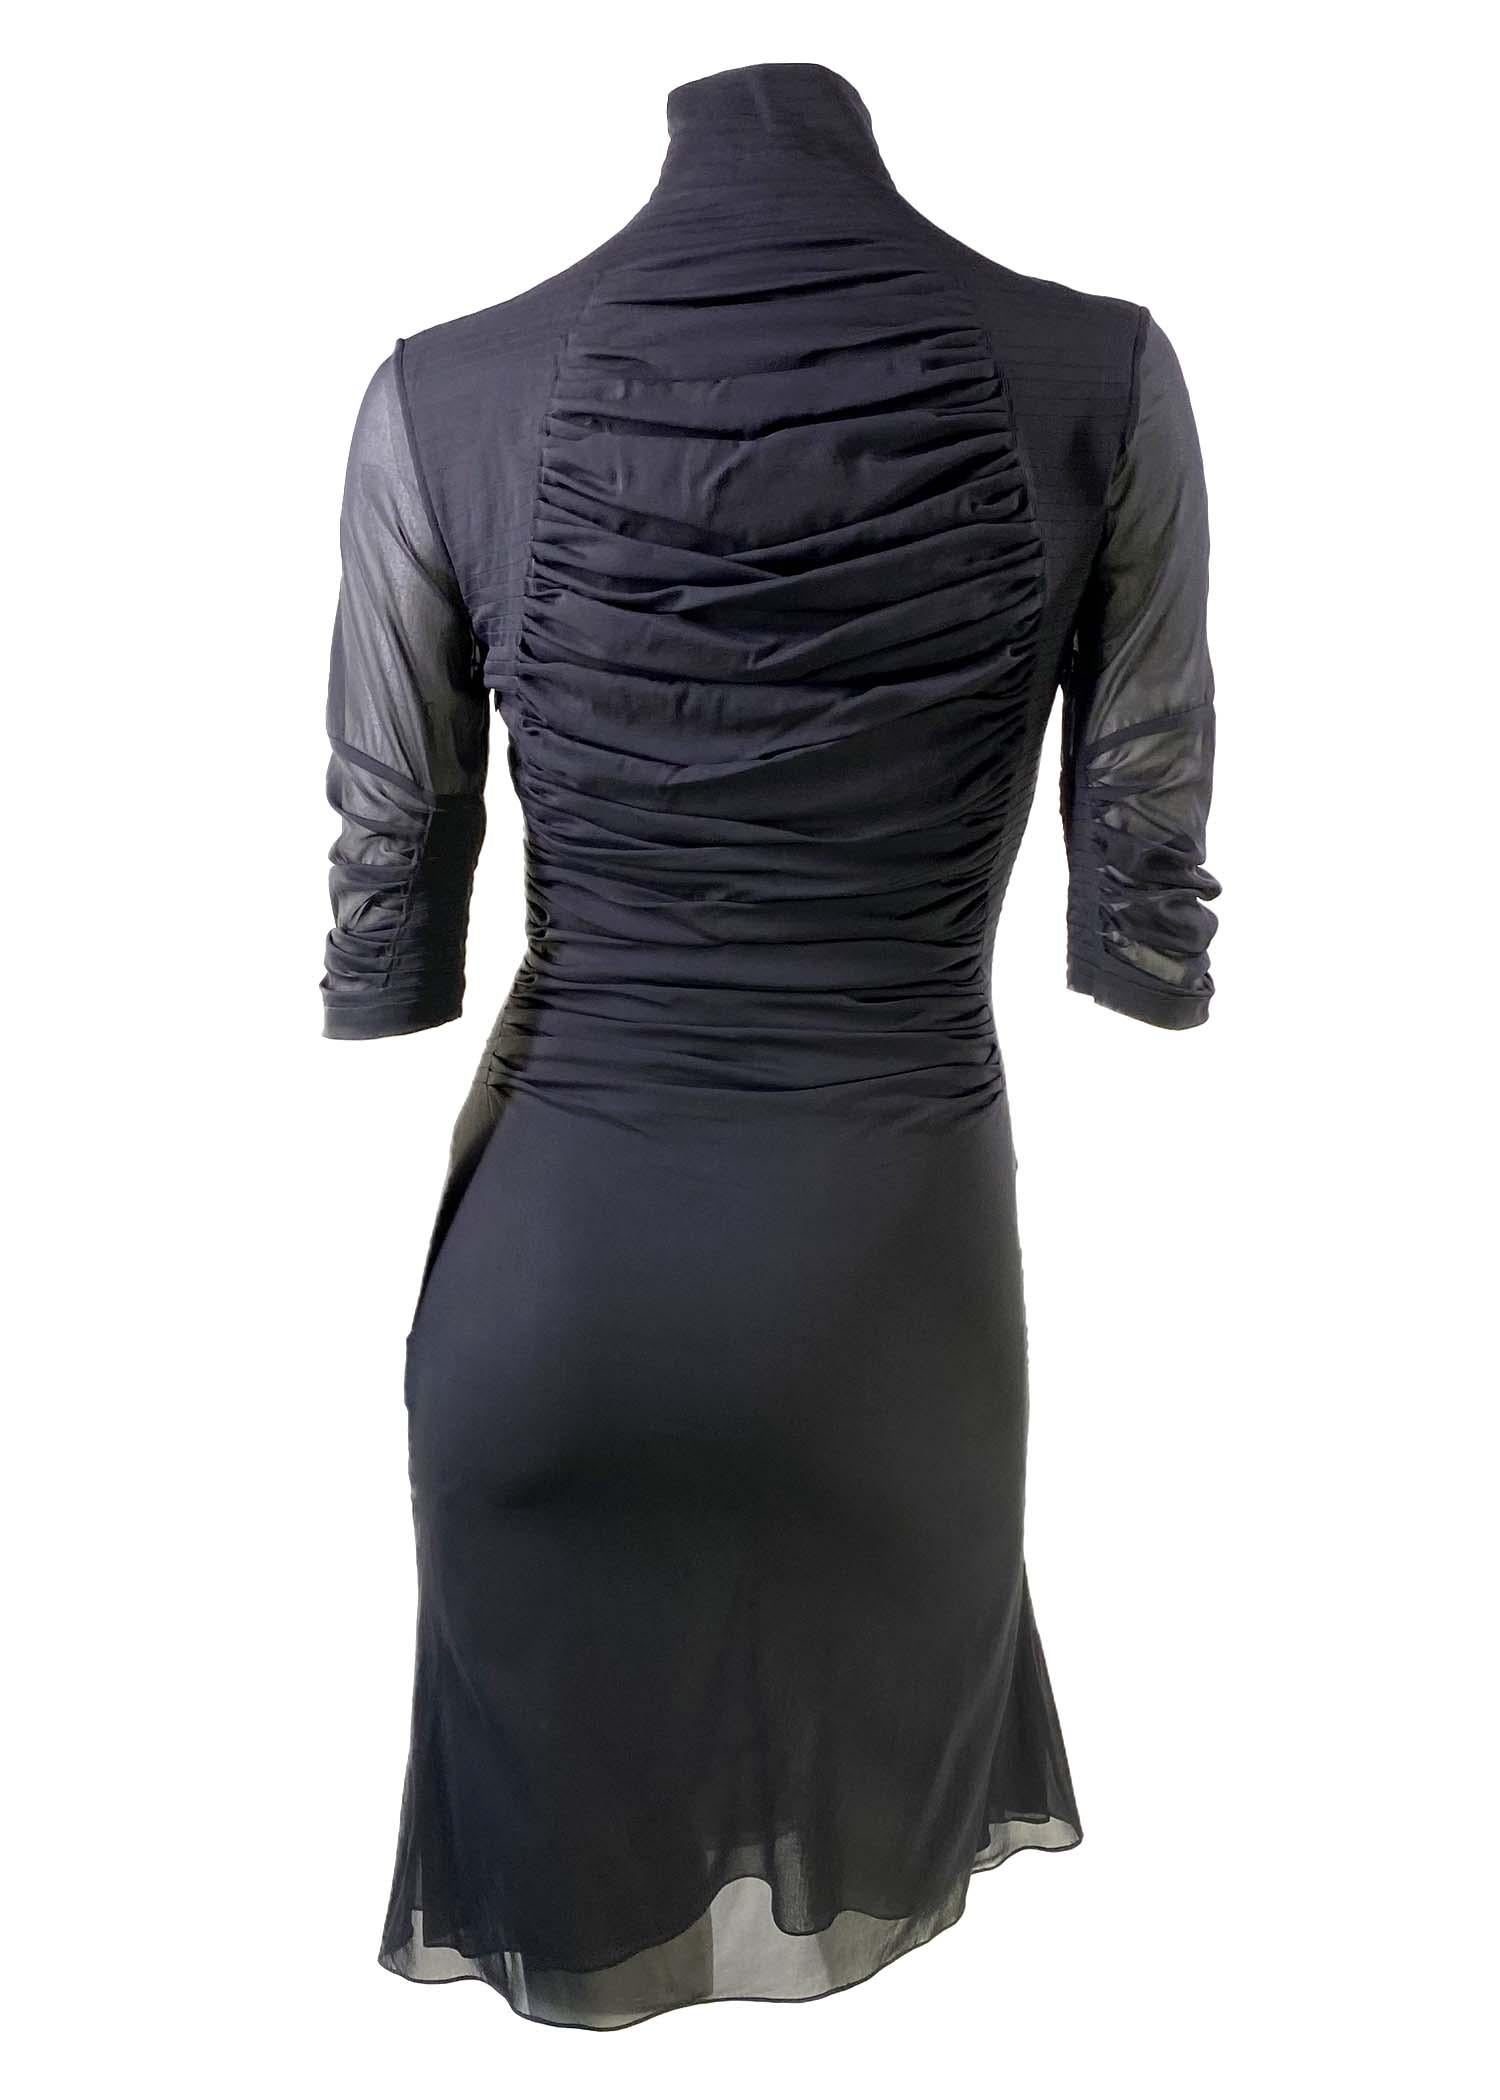 S/S 2001 Yves Saint Laurent by Tom Ford Black Pleated Silk Runway Dress In Excellent Condition For Sale In West Hollywood, CA